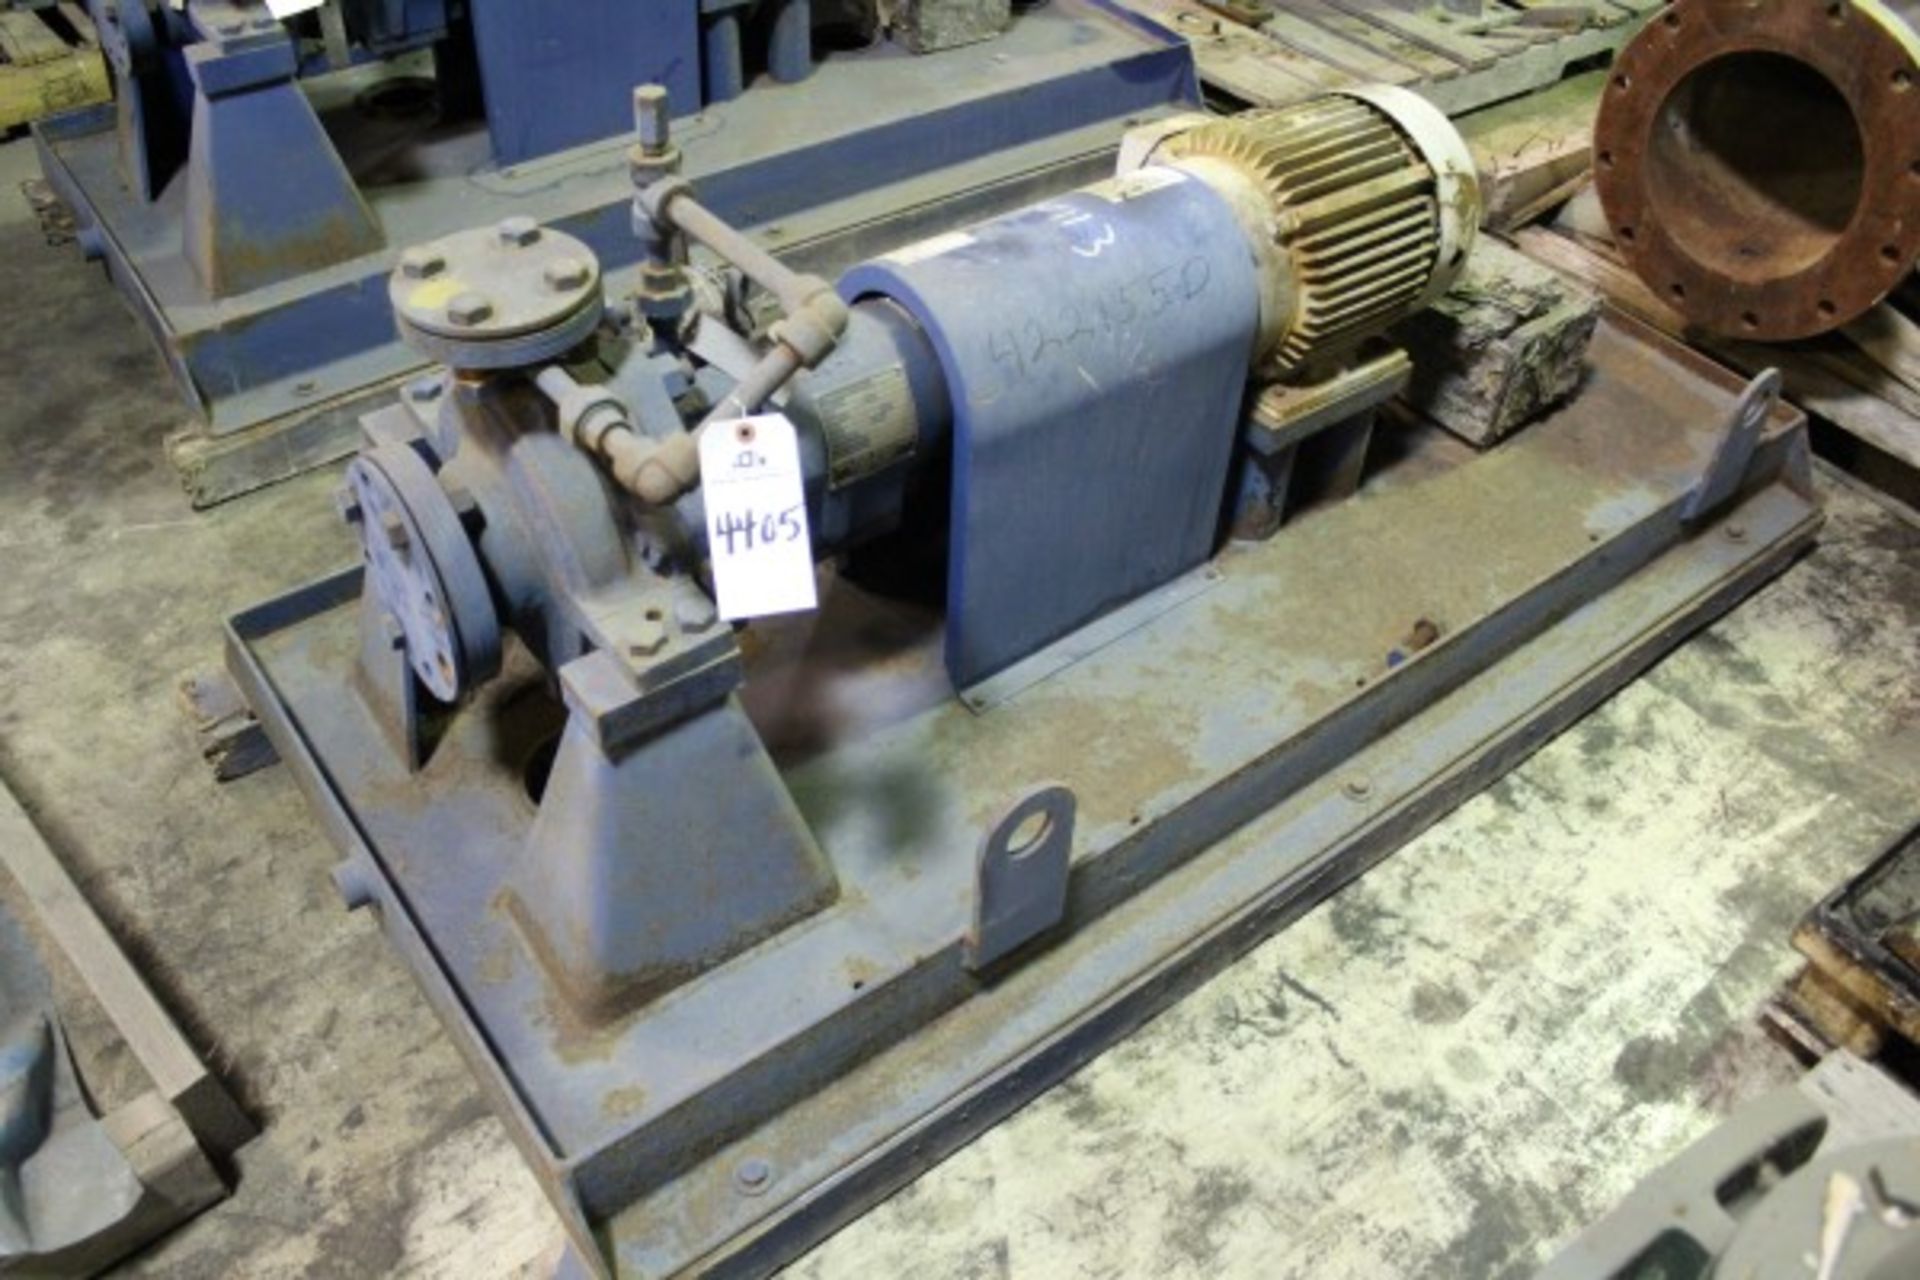 Sulzer Bingham 1.5 x 3 x 9 Pump,7.5 HP | Seller to load for $10 per lot or buyers may remove hand